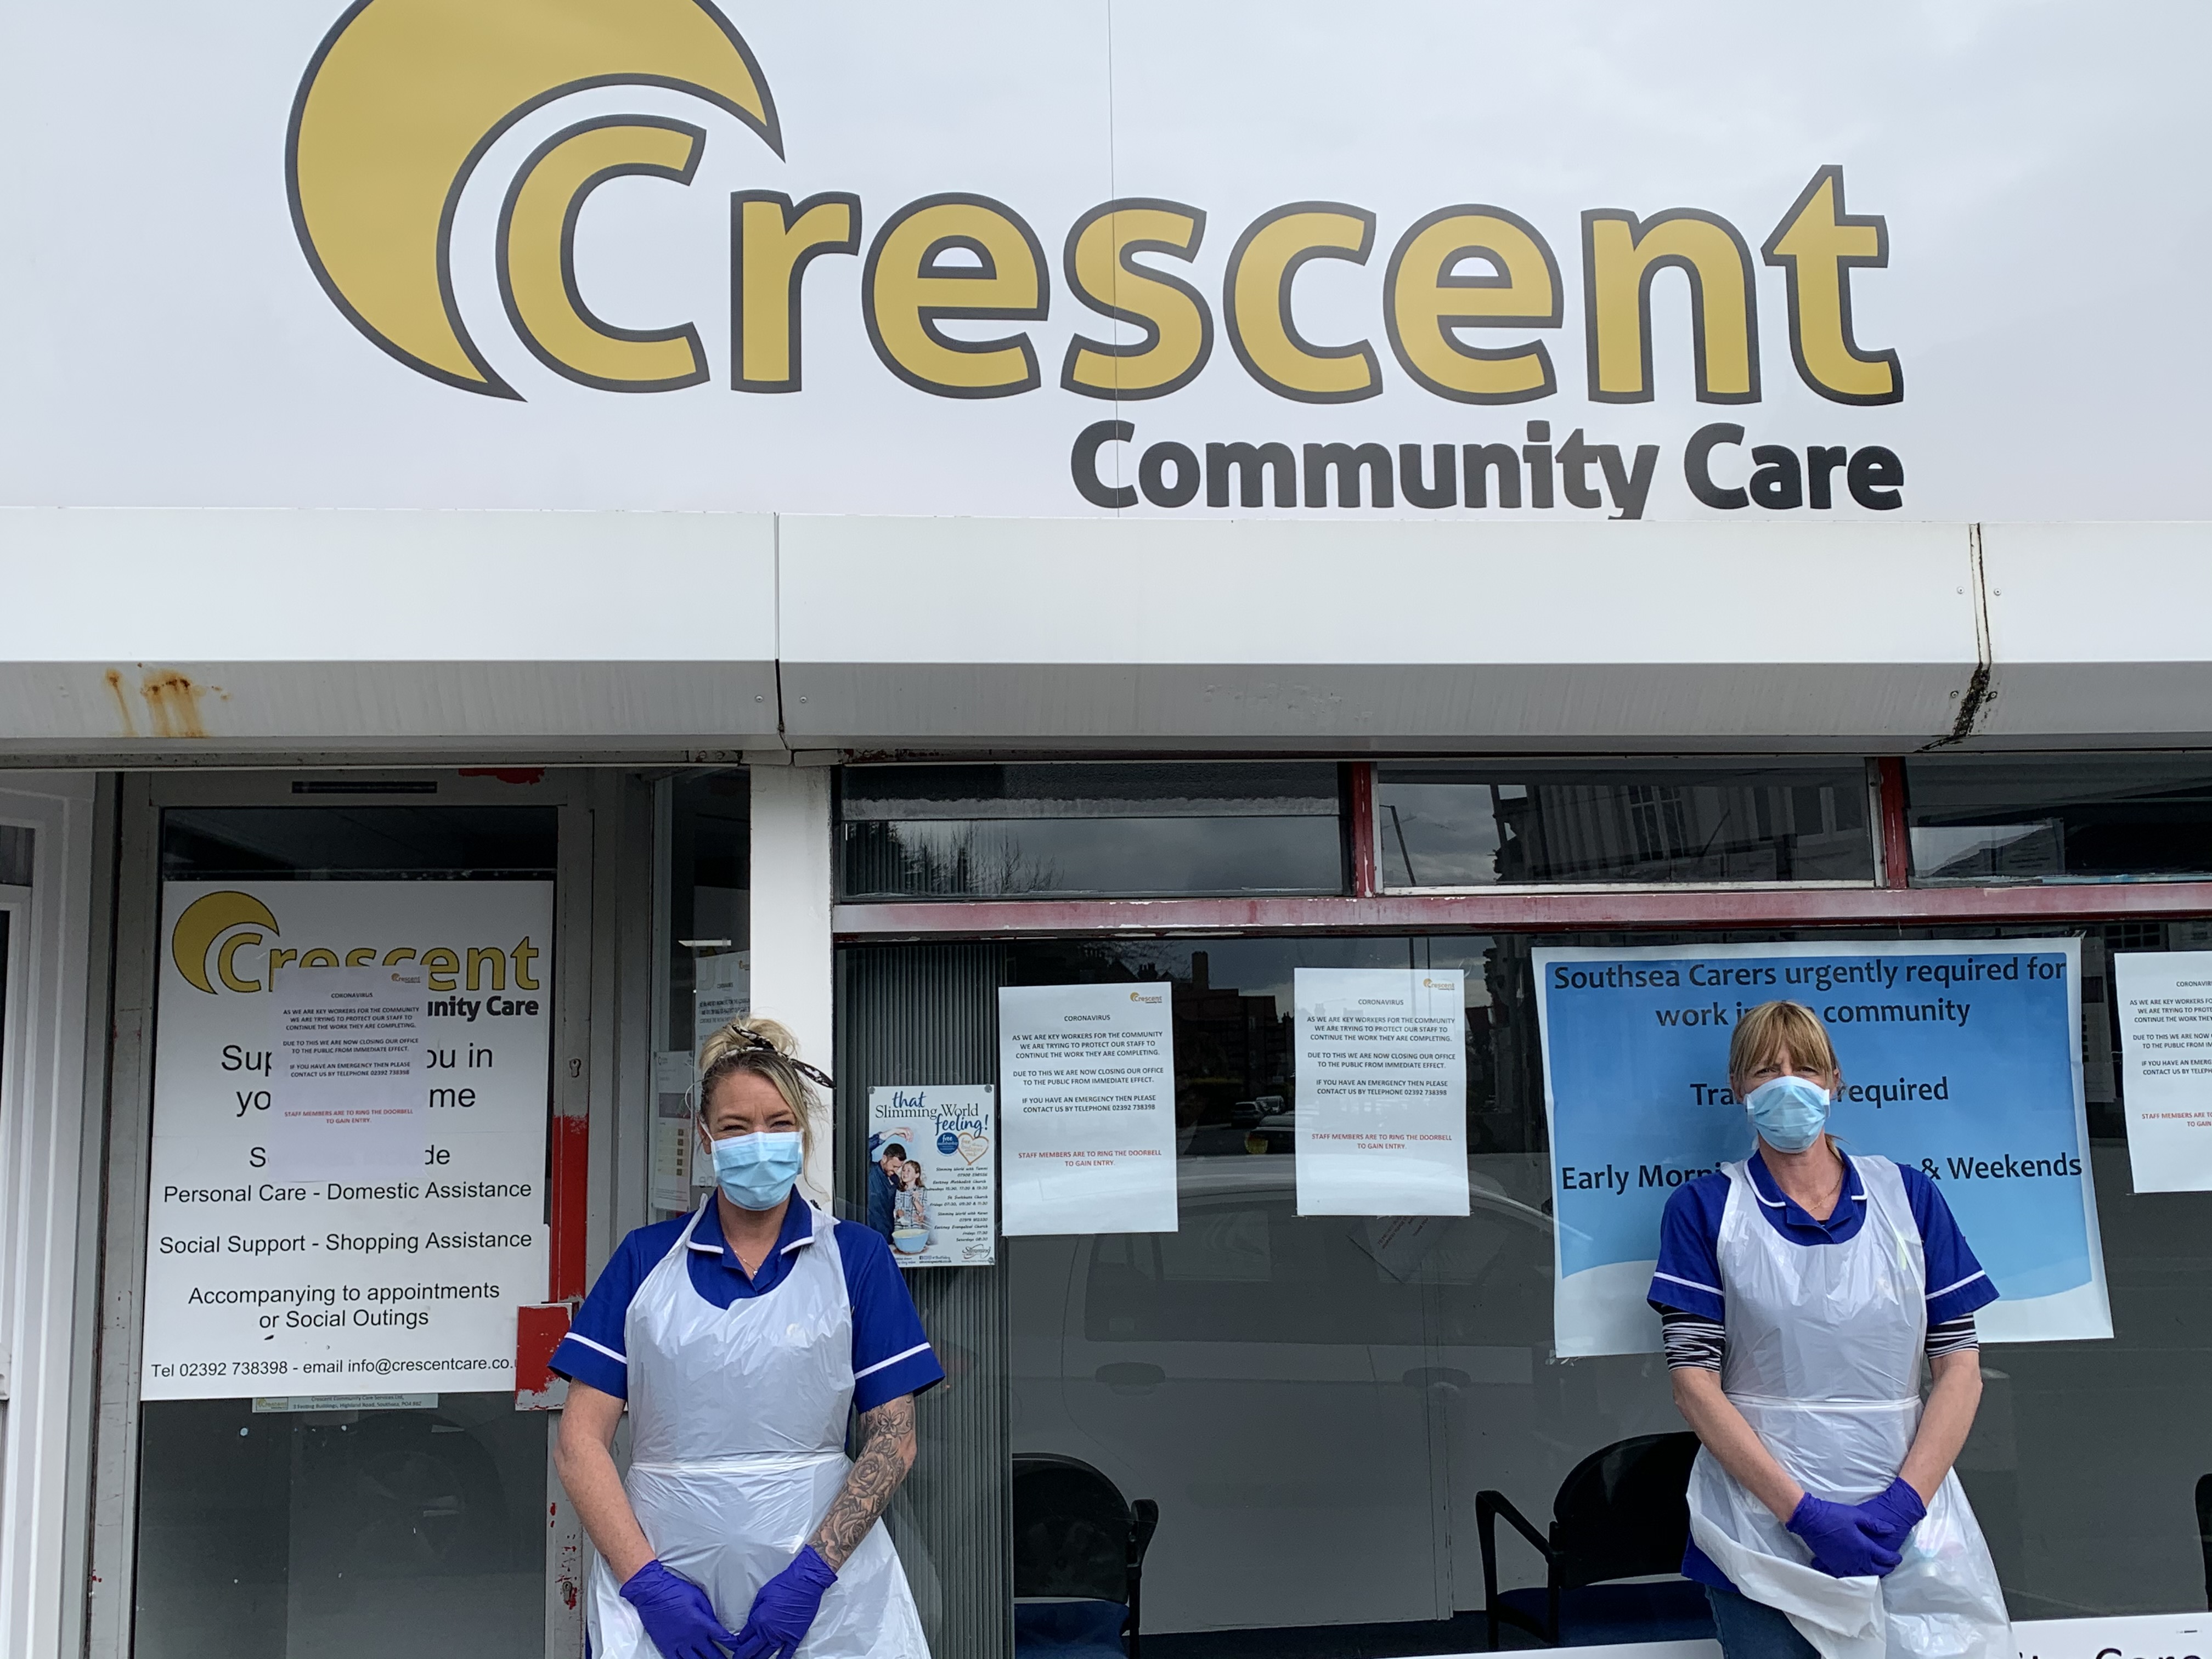 Crescent Community Care staff wearing their personal protective equipment